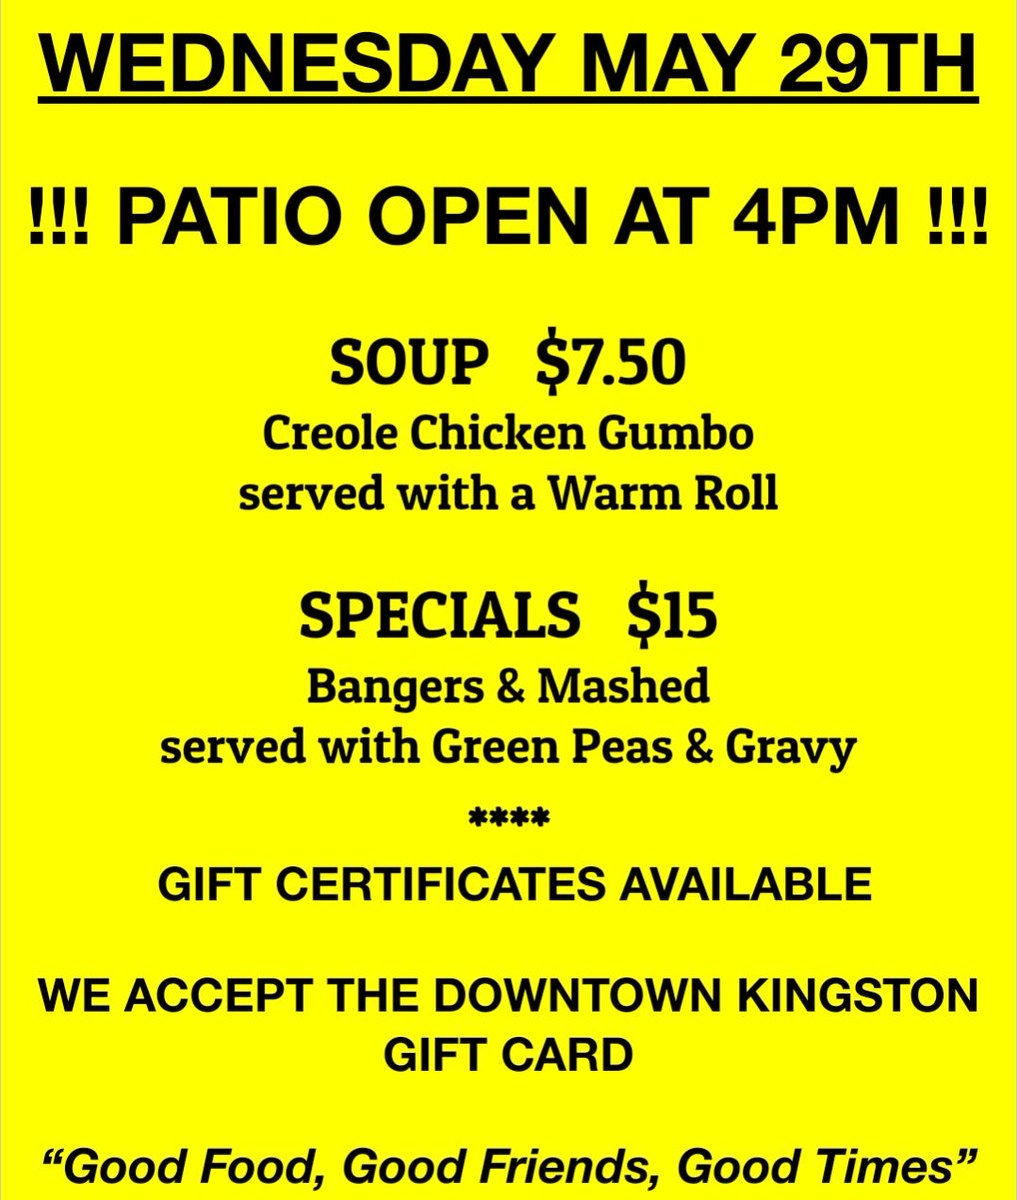 !!! #PATIO OPEN AT 4PM !!! 

#goodfood at #themothership 
#OPEN TUES - SUN, NOON - 12AM #golocal #ygk #ygklove #publife #giftcertificates #yumgk #fishandchips #craftbeer #takeout #sunnydays @downtownkingston Gift Card